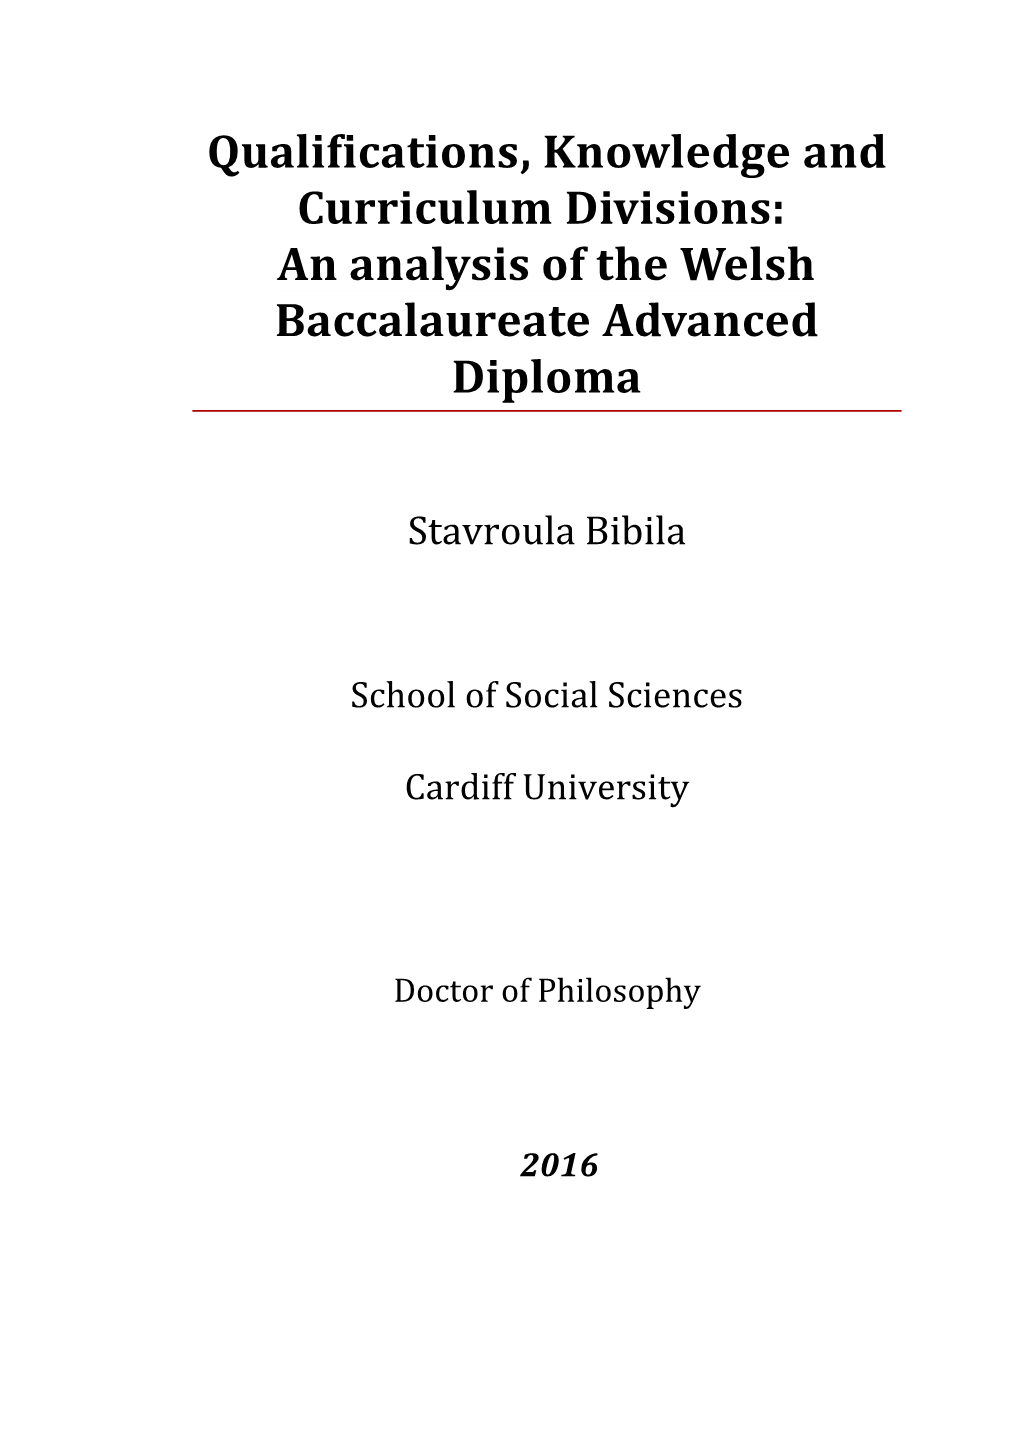 Qualifications, Knowledge and Curriculum Divisions: an Analysis of the Welsh Baccalaureate Advanced Diploma